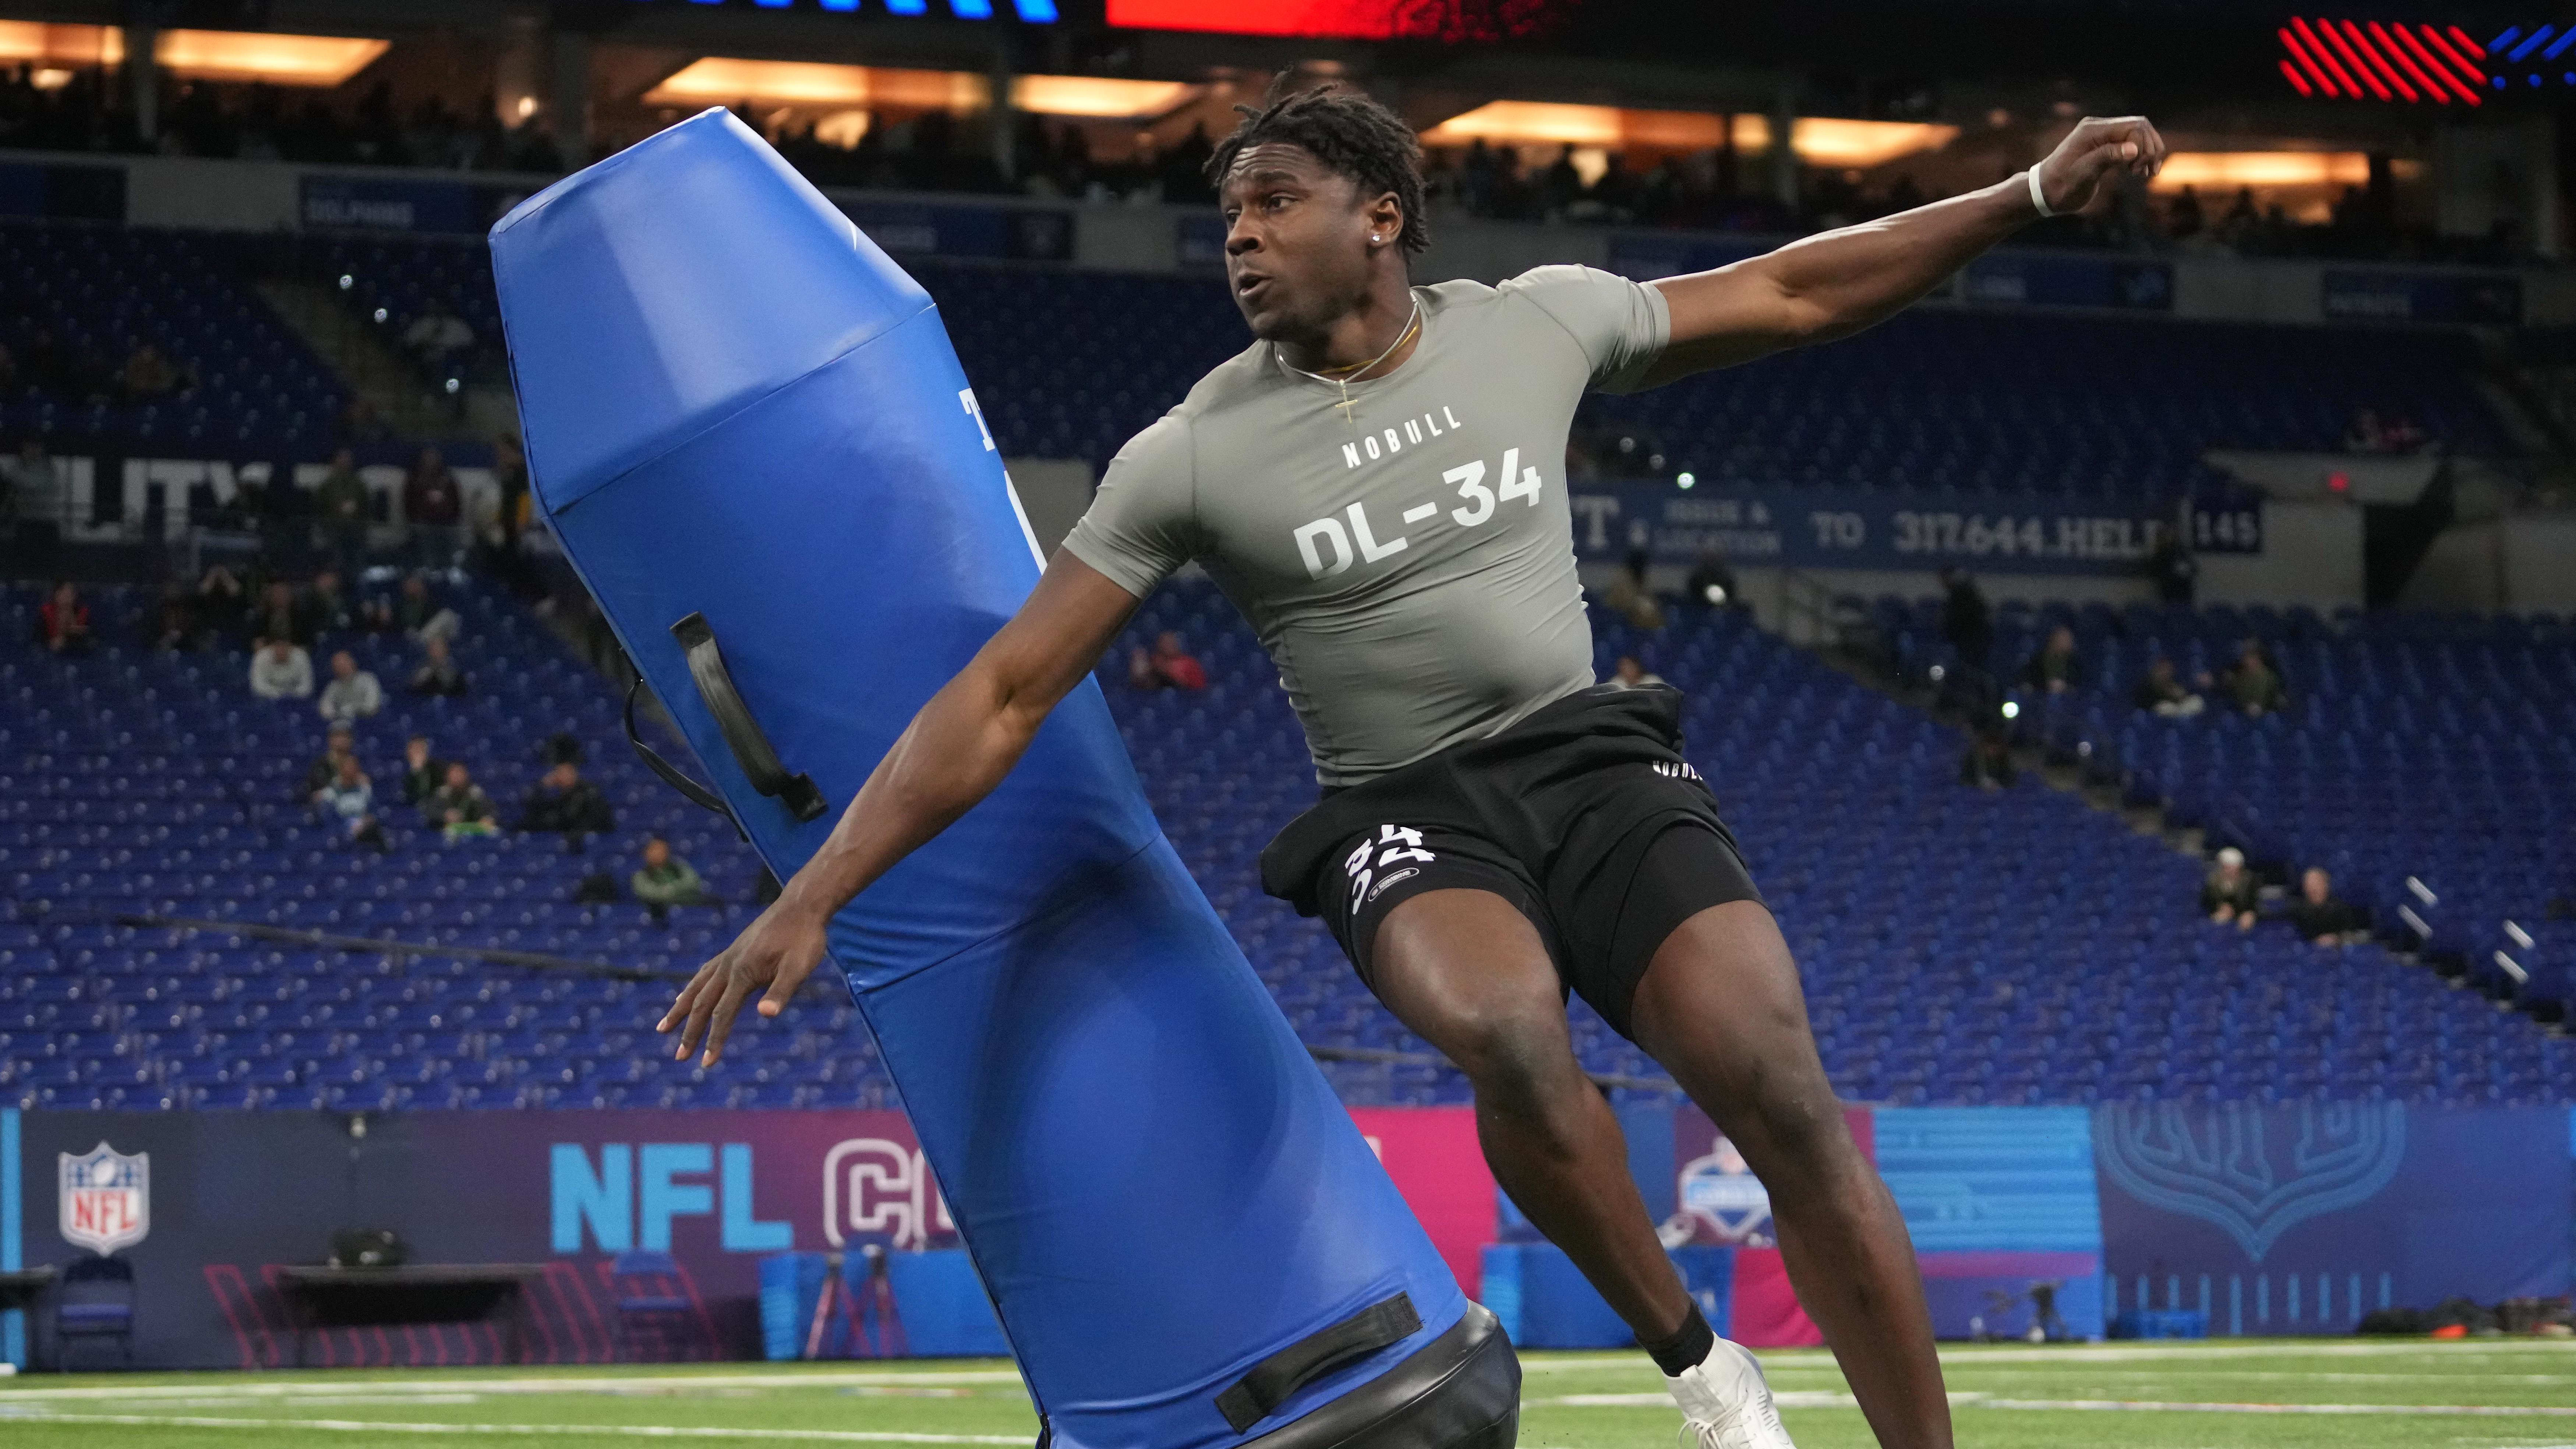 Houston Christian defensive lineman Jalyx Hunt (DL34) works out at the NFL Scouting Combine.